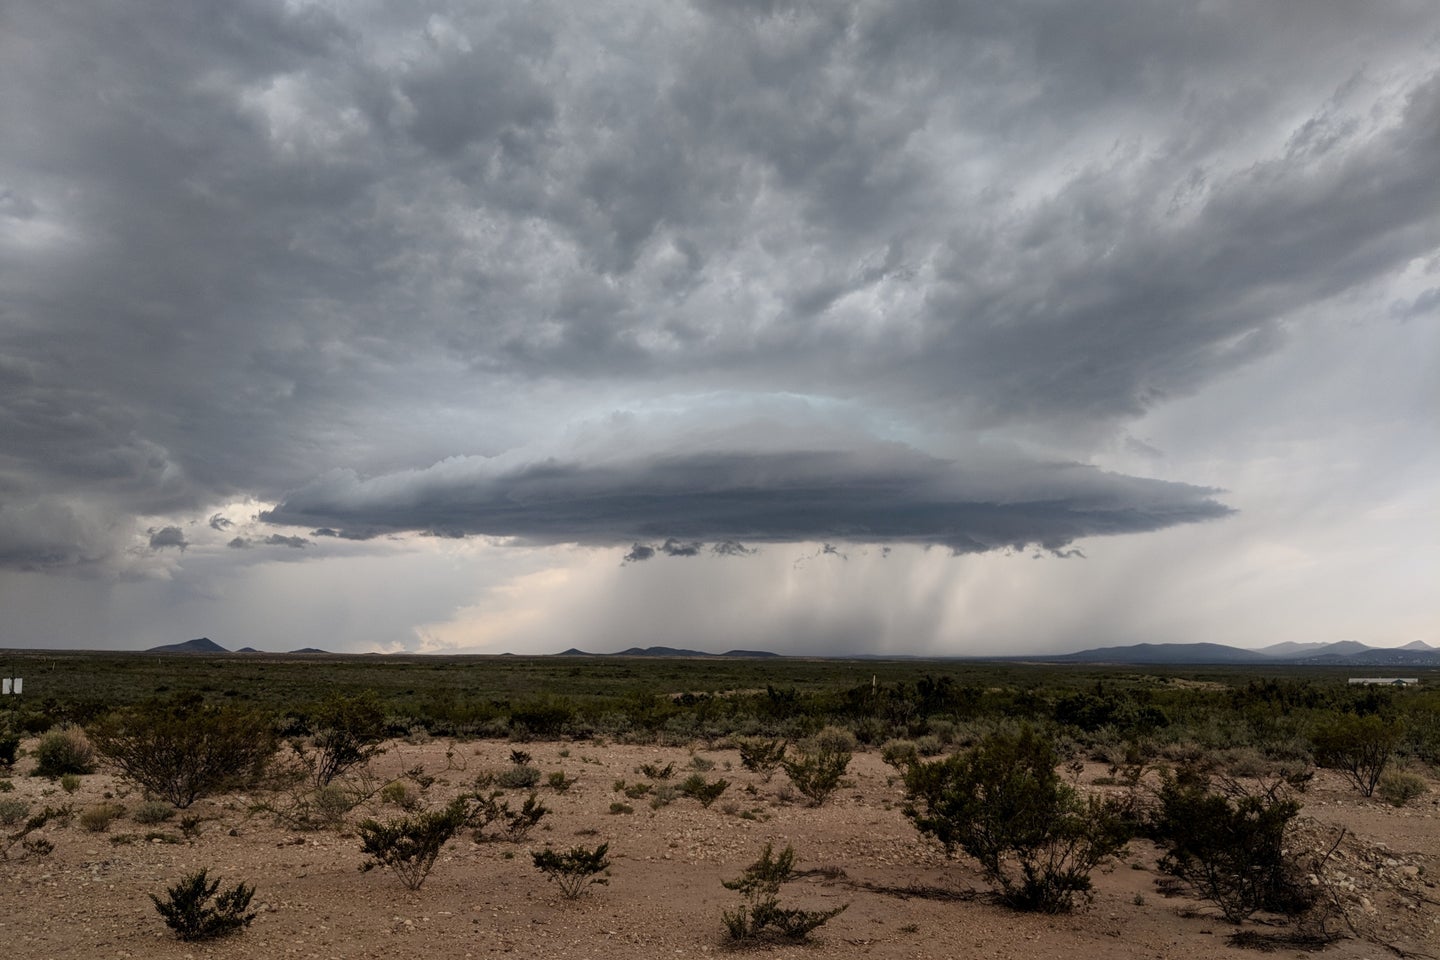 A storm cloud brought by the North American monsoon hangs over the desert near Tombstone, Arizona.